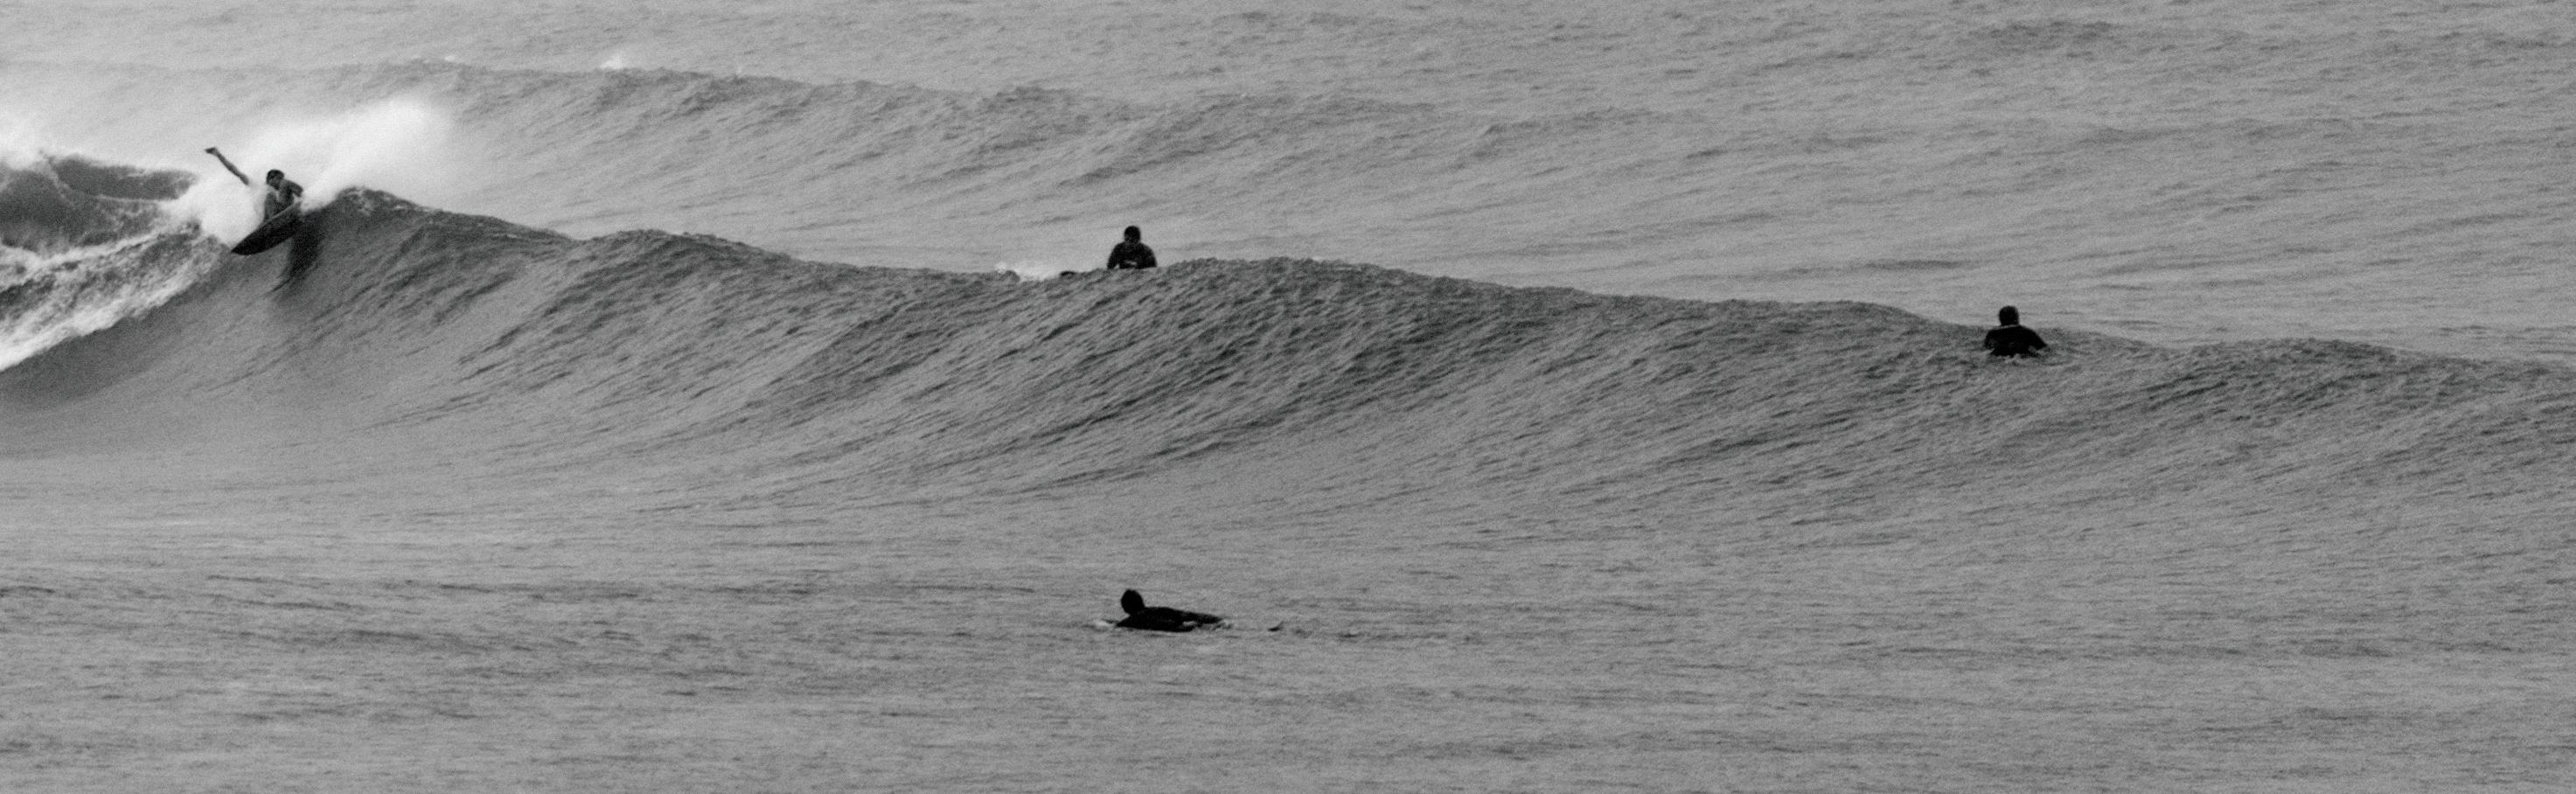 Layback - Surf Photography B&W limited edition Print, Signed Archival 2016 For Sale 2